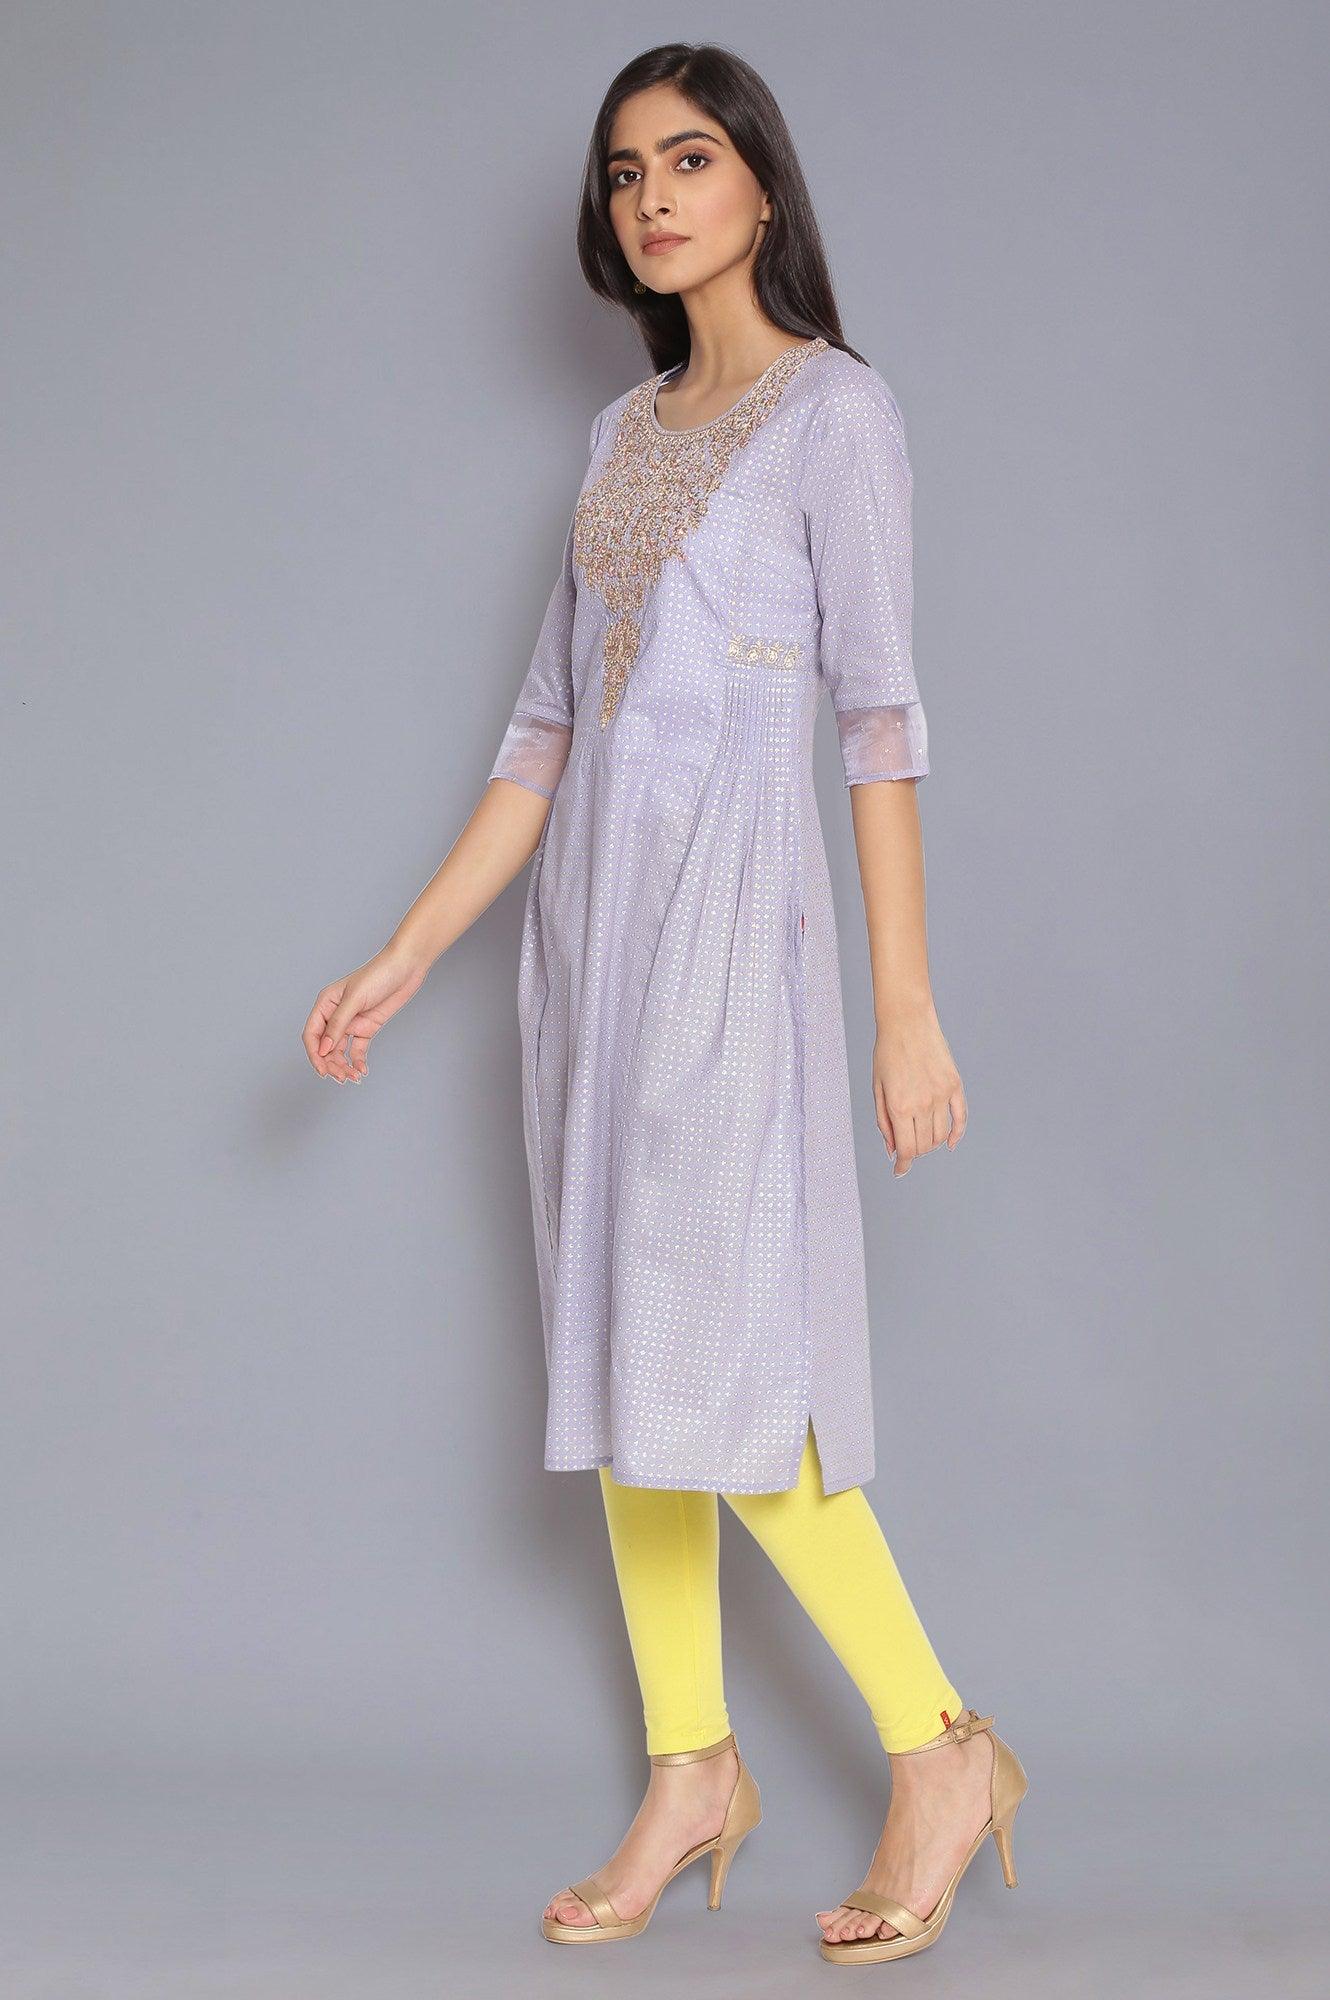 Periwinkle Blue Printed kurta with Embroidery - wforwoman